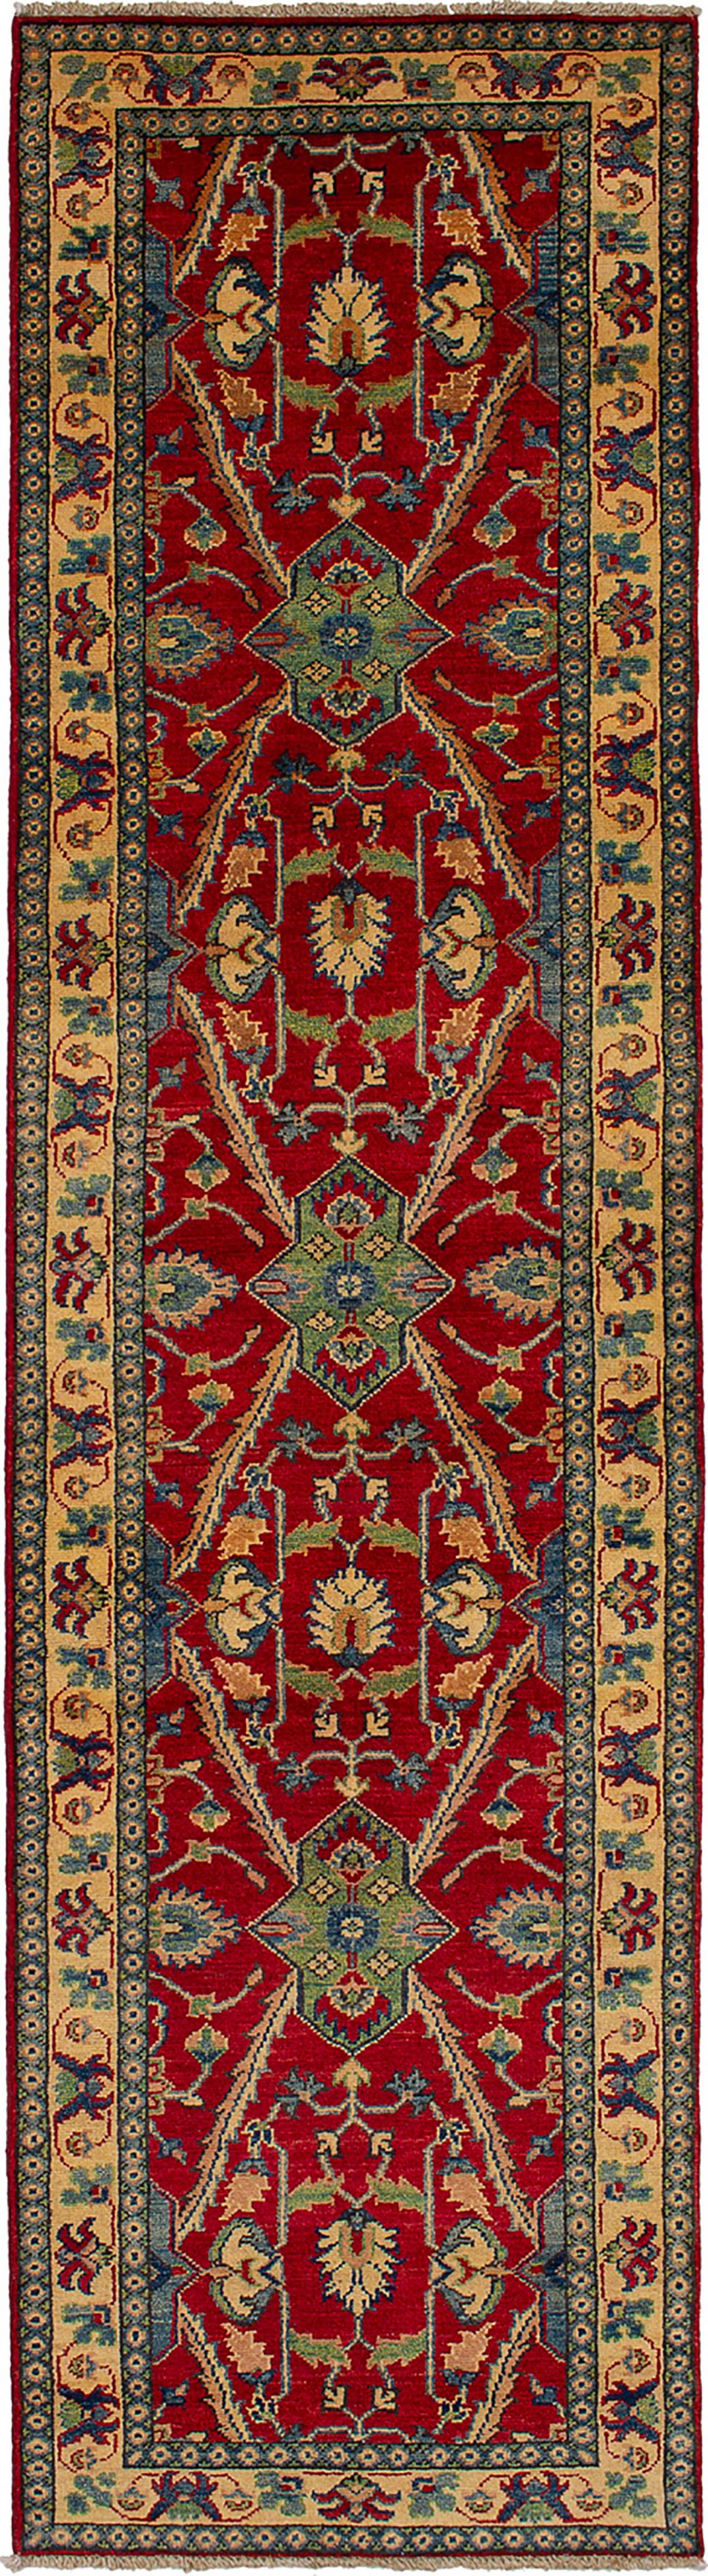 Hand-knotted Finest Gazni Red Wool Rug 2'7" x 9'9"  Size: 2'7" x 9'9"  